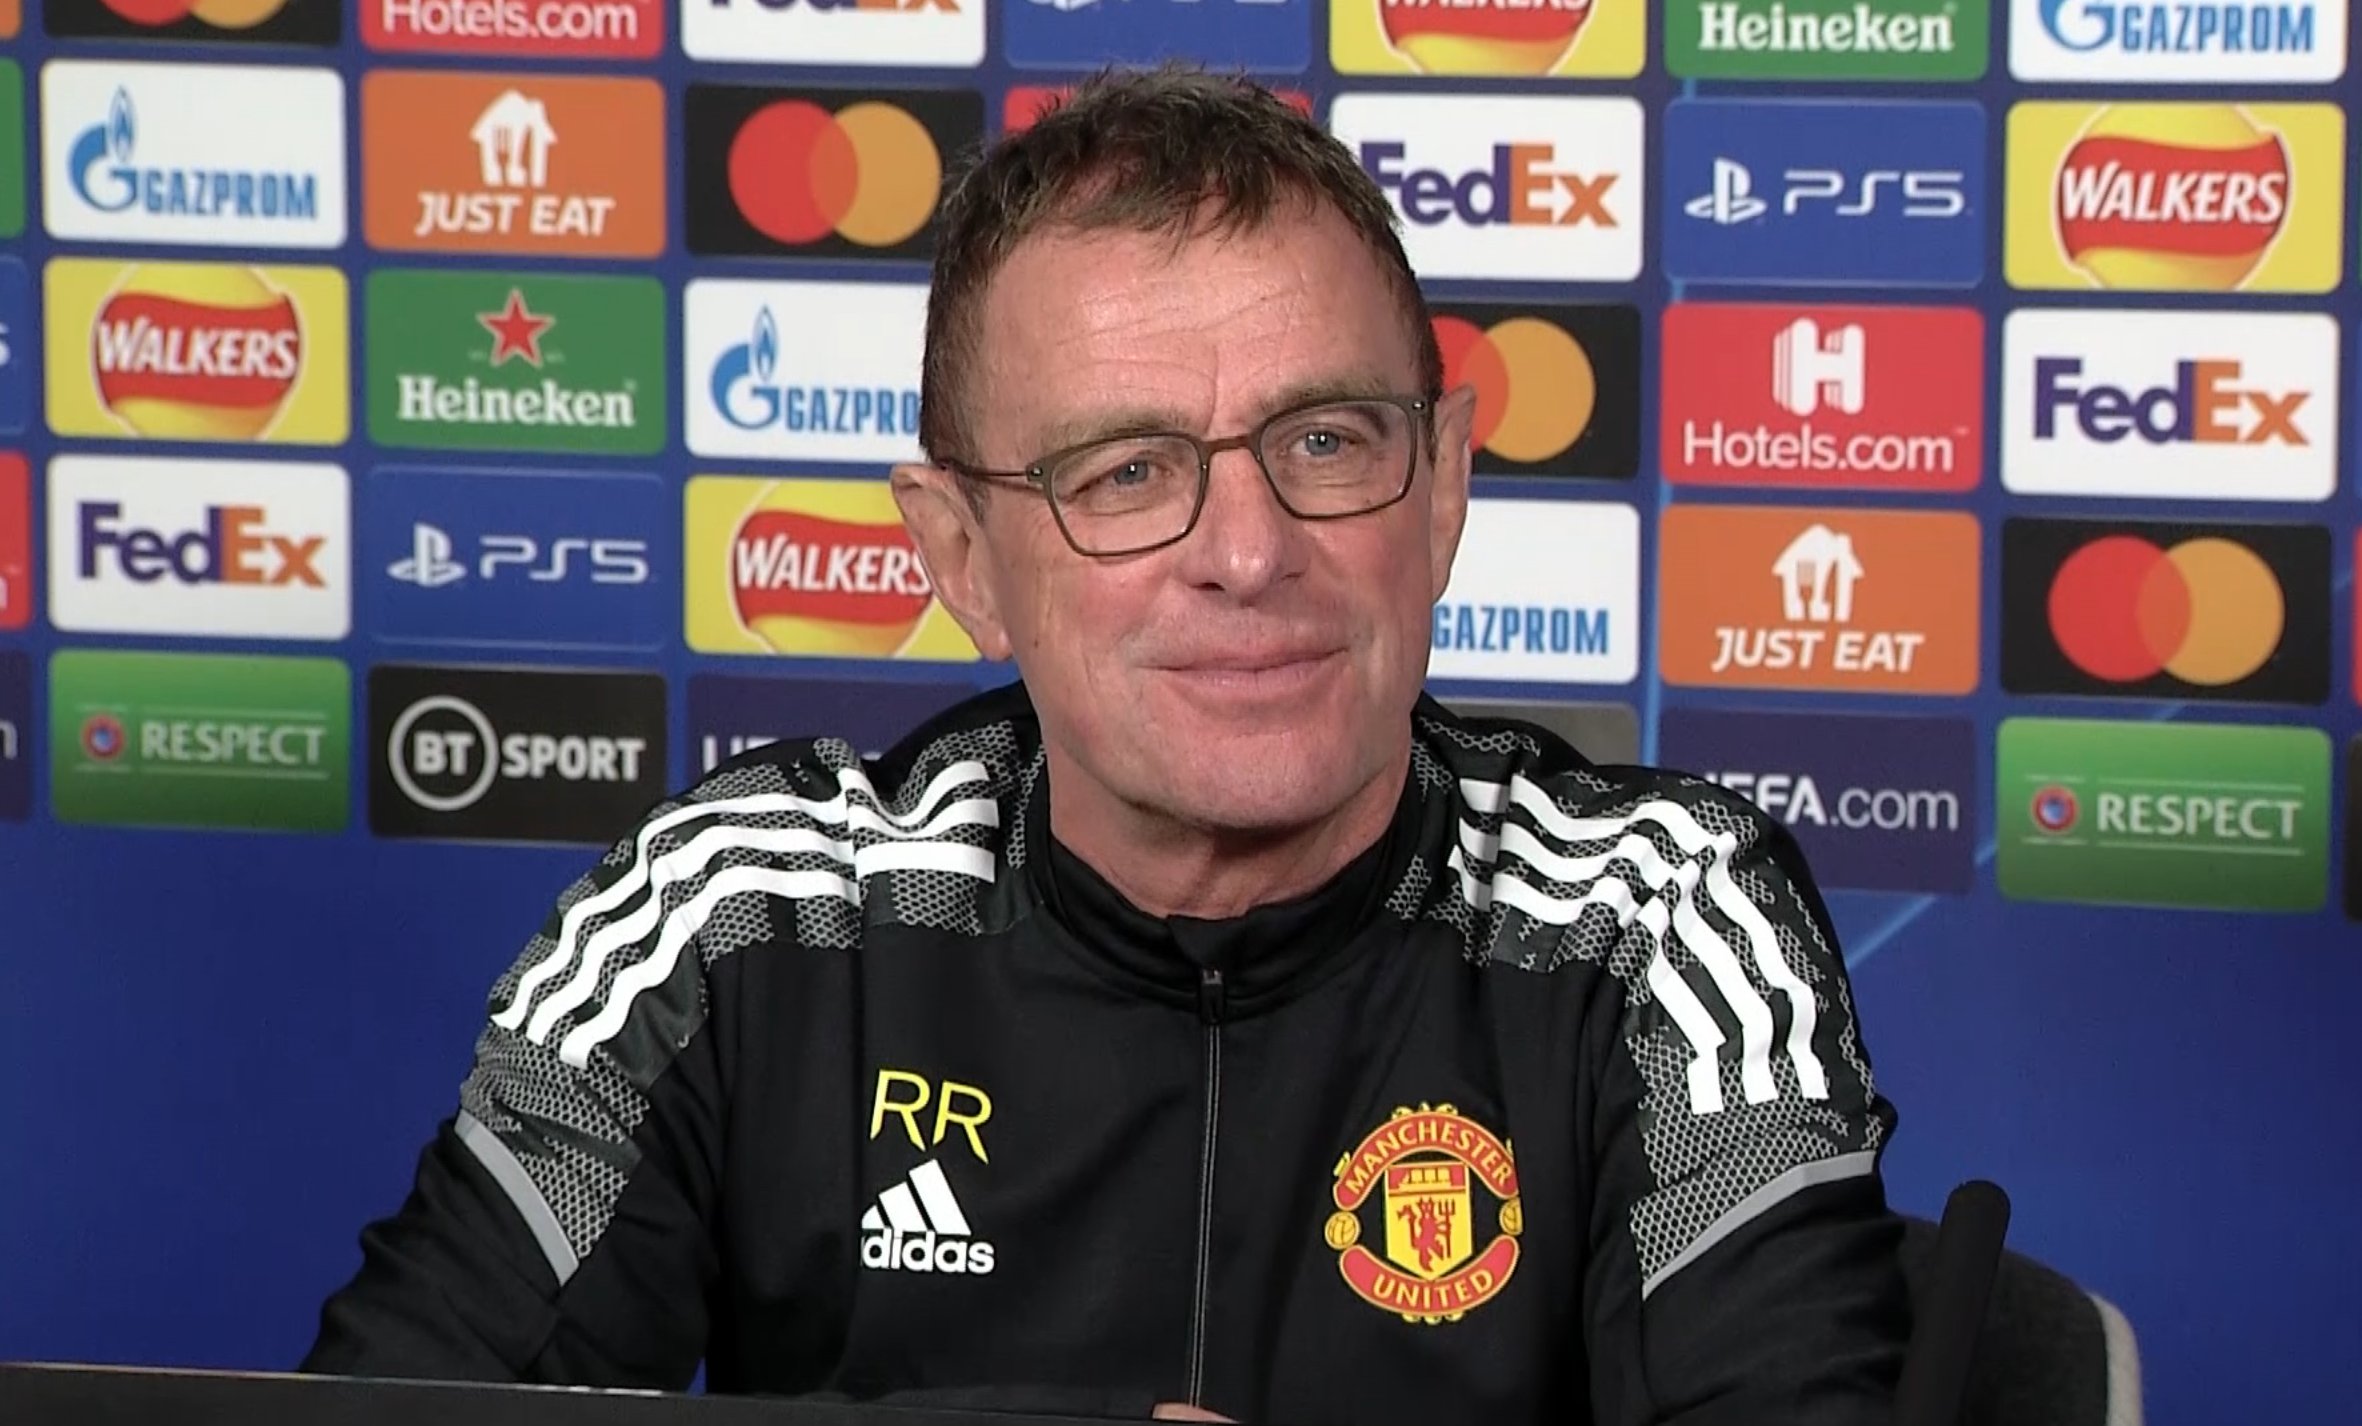 In Champions League you need to perform at highest level possible, proclaims Ralf Rangnick